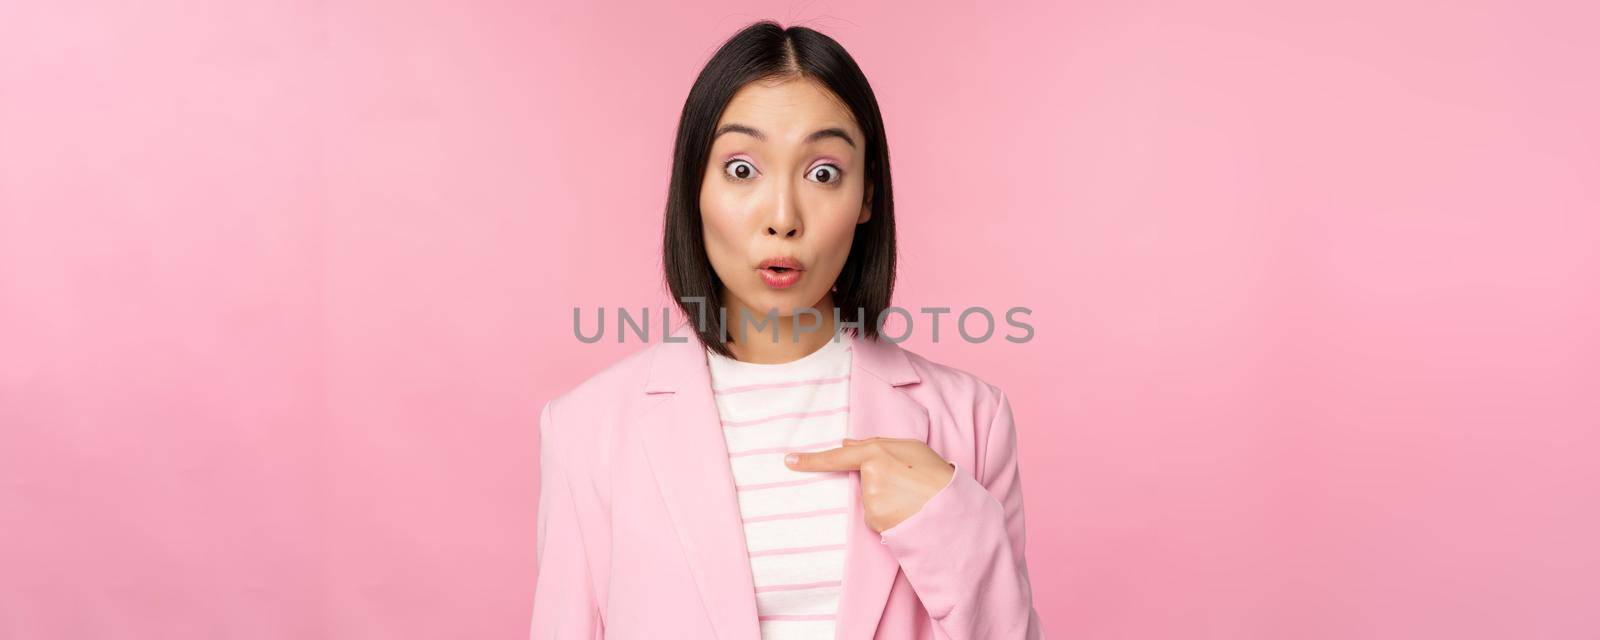 Portrait of asian businesswoman reacts surprised, points at herself with disbelief on face, posing in suit against pink background.